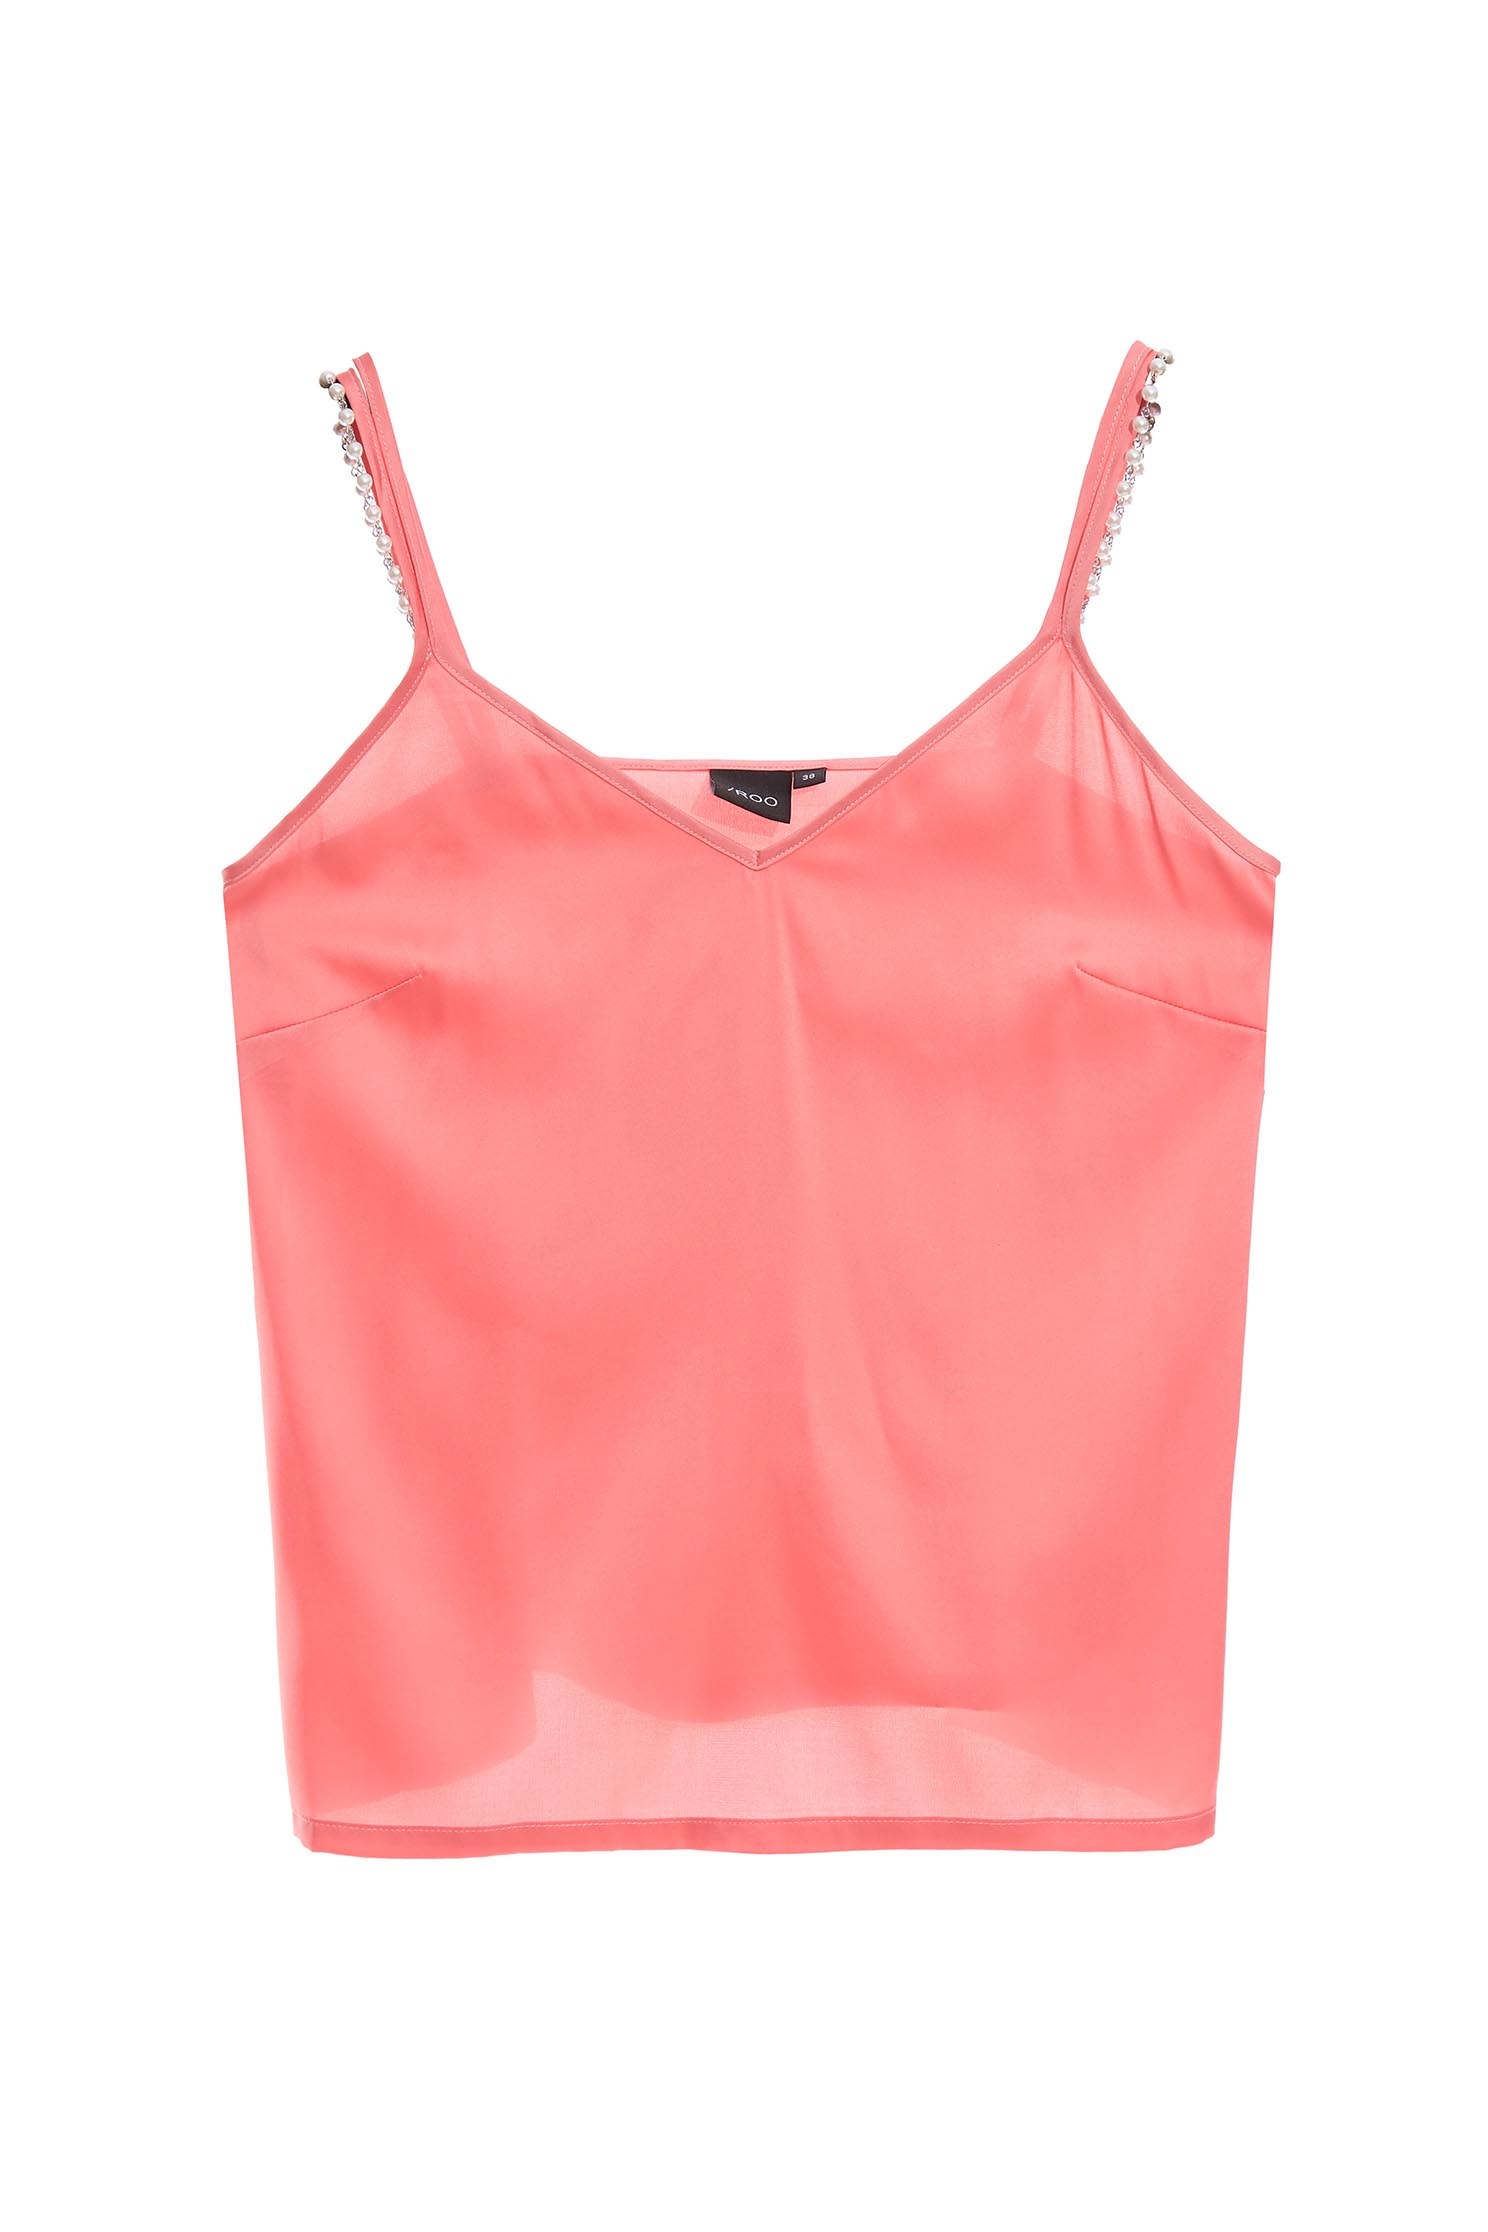 V-neck vest with faux pearl chain straps,sleeveless tops,Season (SS) Look,coolsummer,pearl,healing colors,iROO LIVE,Pink,Thin straps,sleeveless tops